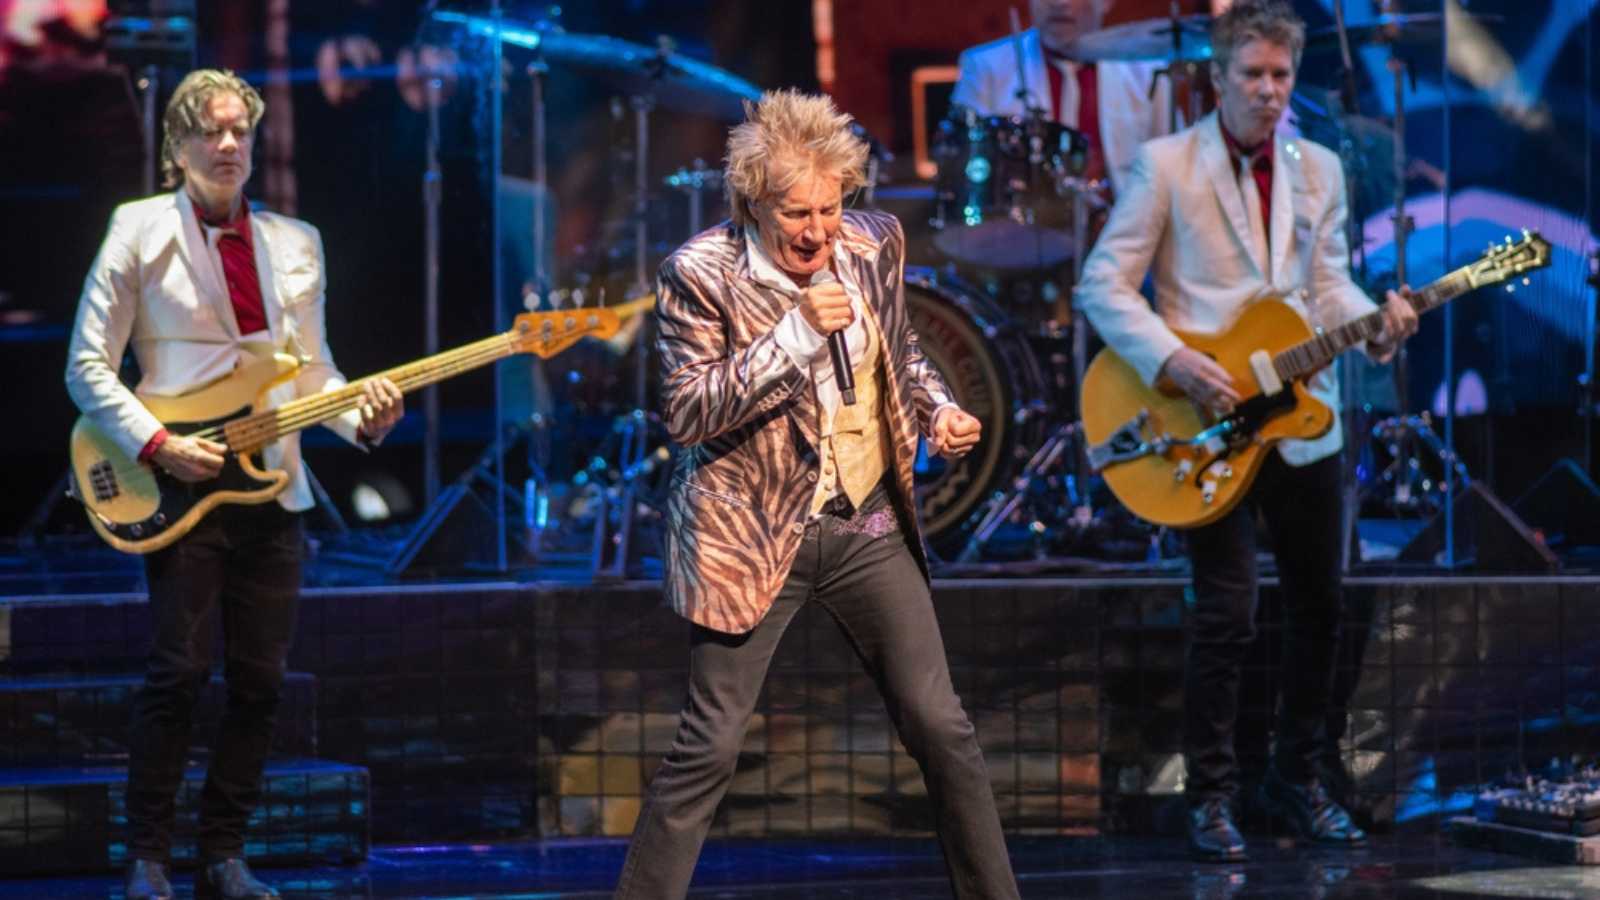 HOLLYWOOD, FLORIDA - FEBRUARY 13, 2023: Rod Stewart performs on stage at the Hard Rock Live.